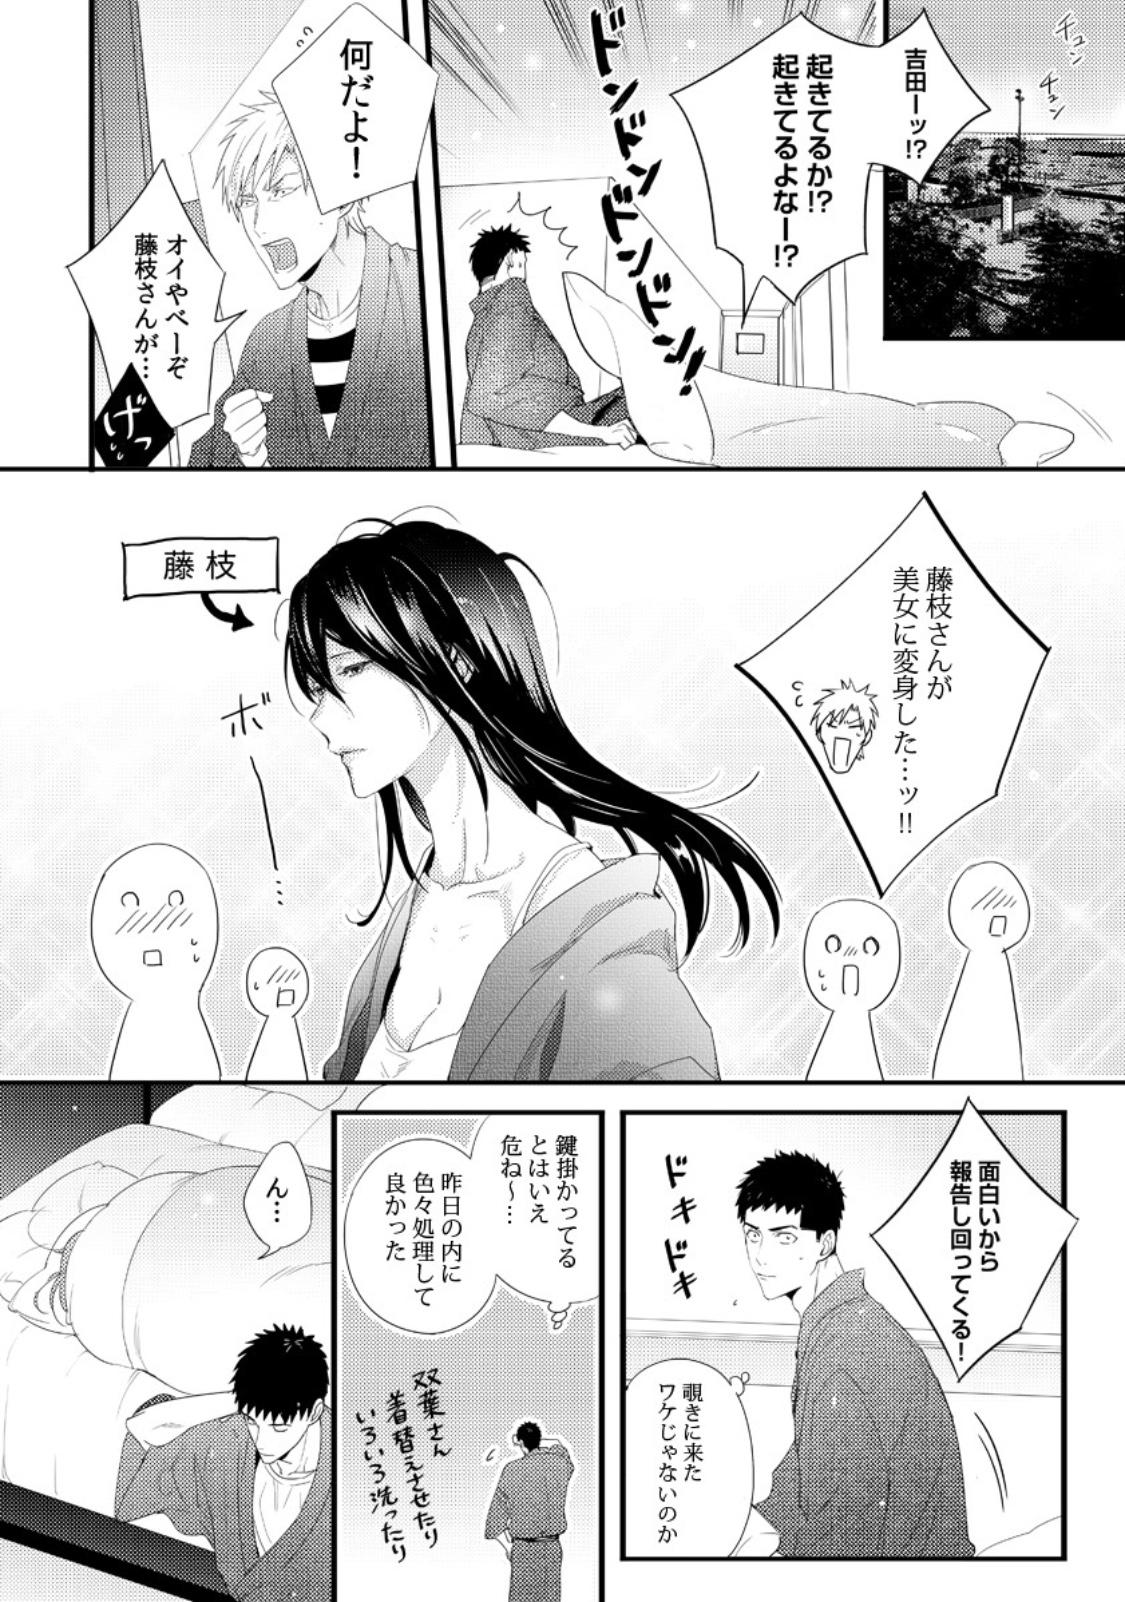 Please Let Me Hold You Futaba-San! Ch. 1+2 24